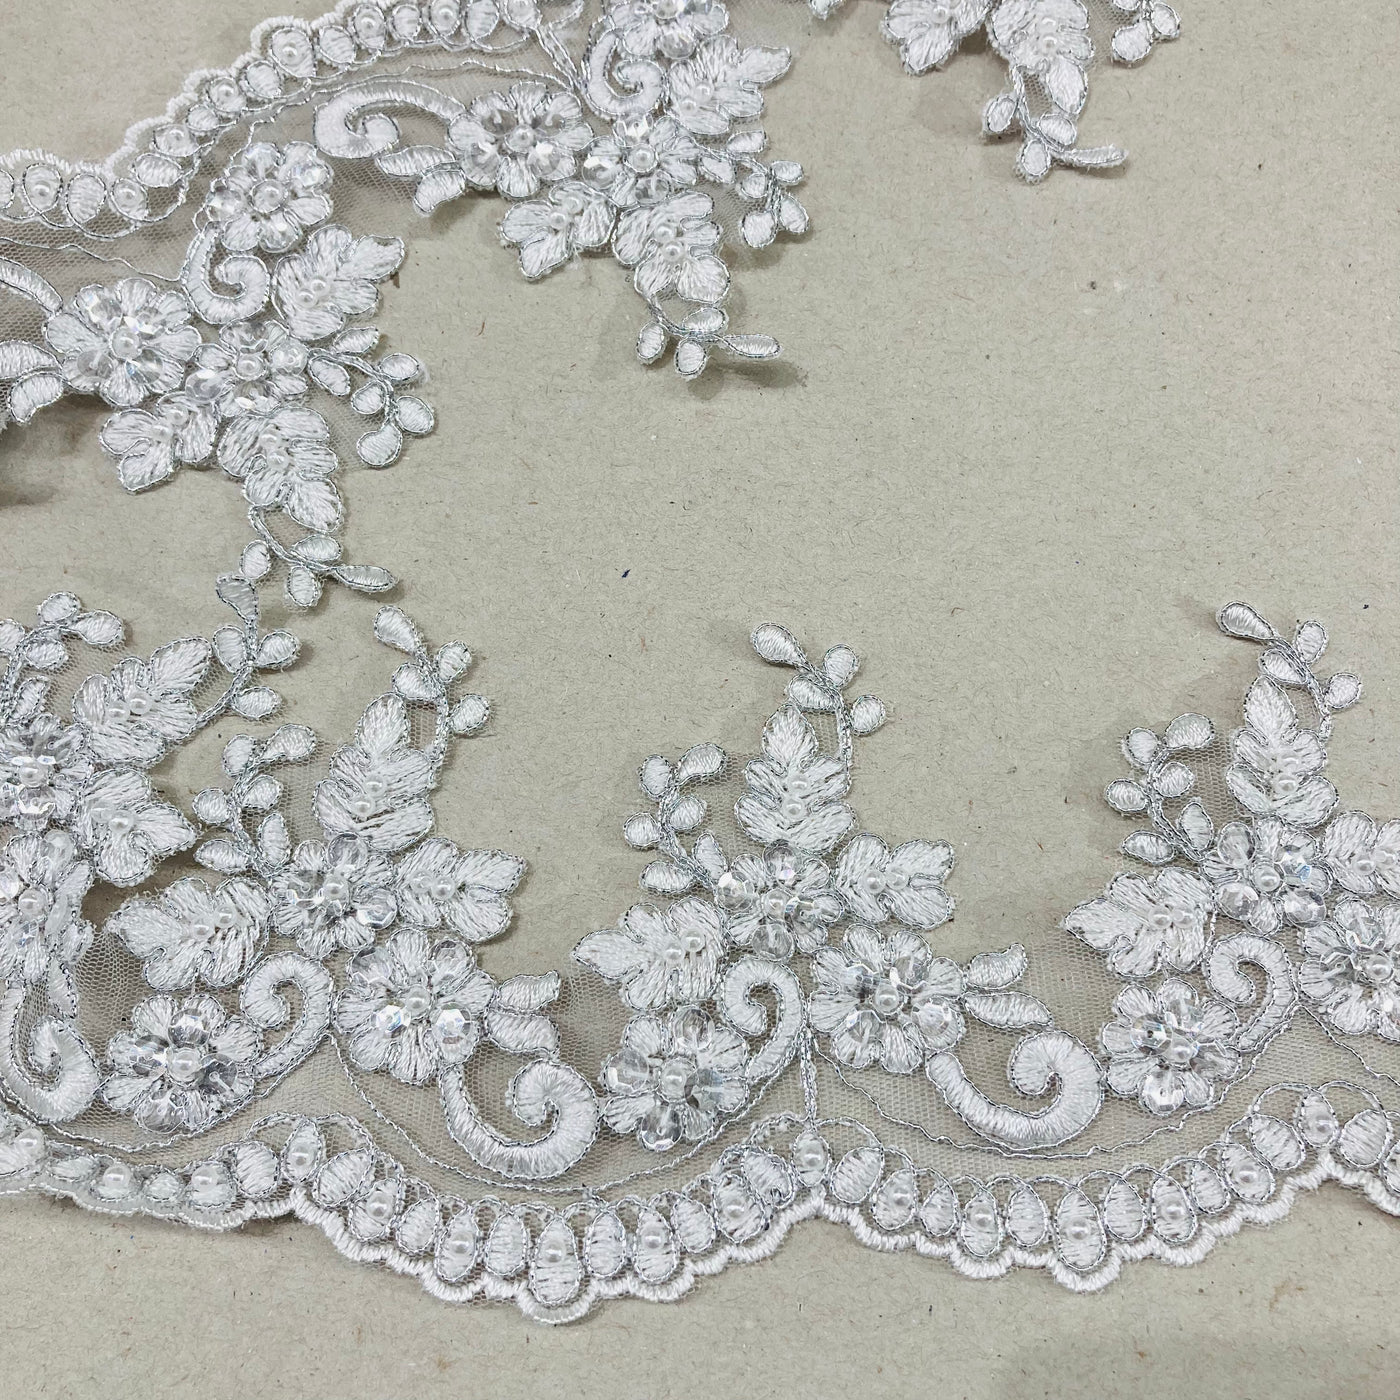 Beaded & Corded Lace Trimming Embroidered on 100% Polyester Net Mesh | Lace USA